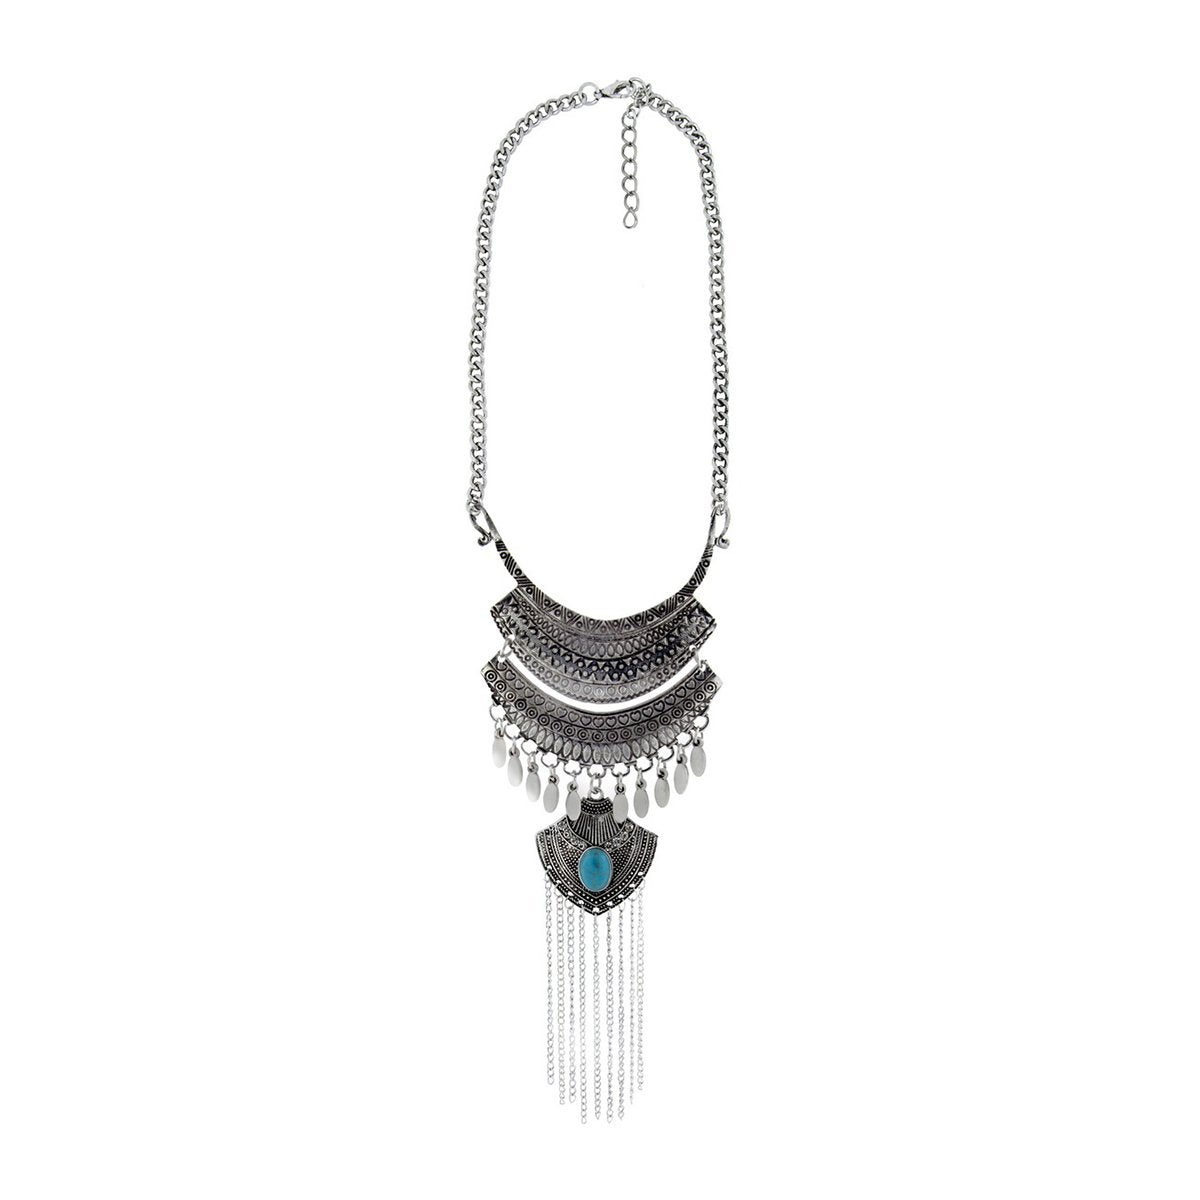 Tribal Bohemian Afghani Statement Crystal Oxidized Silver Necklace